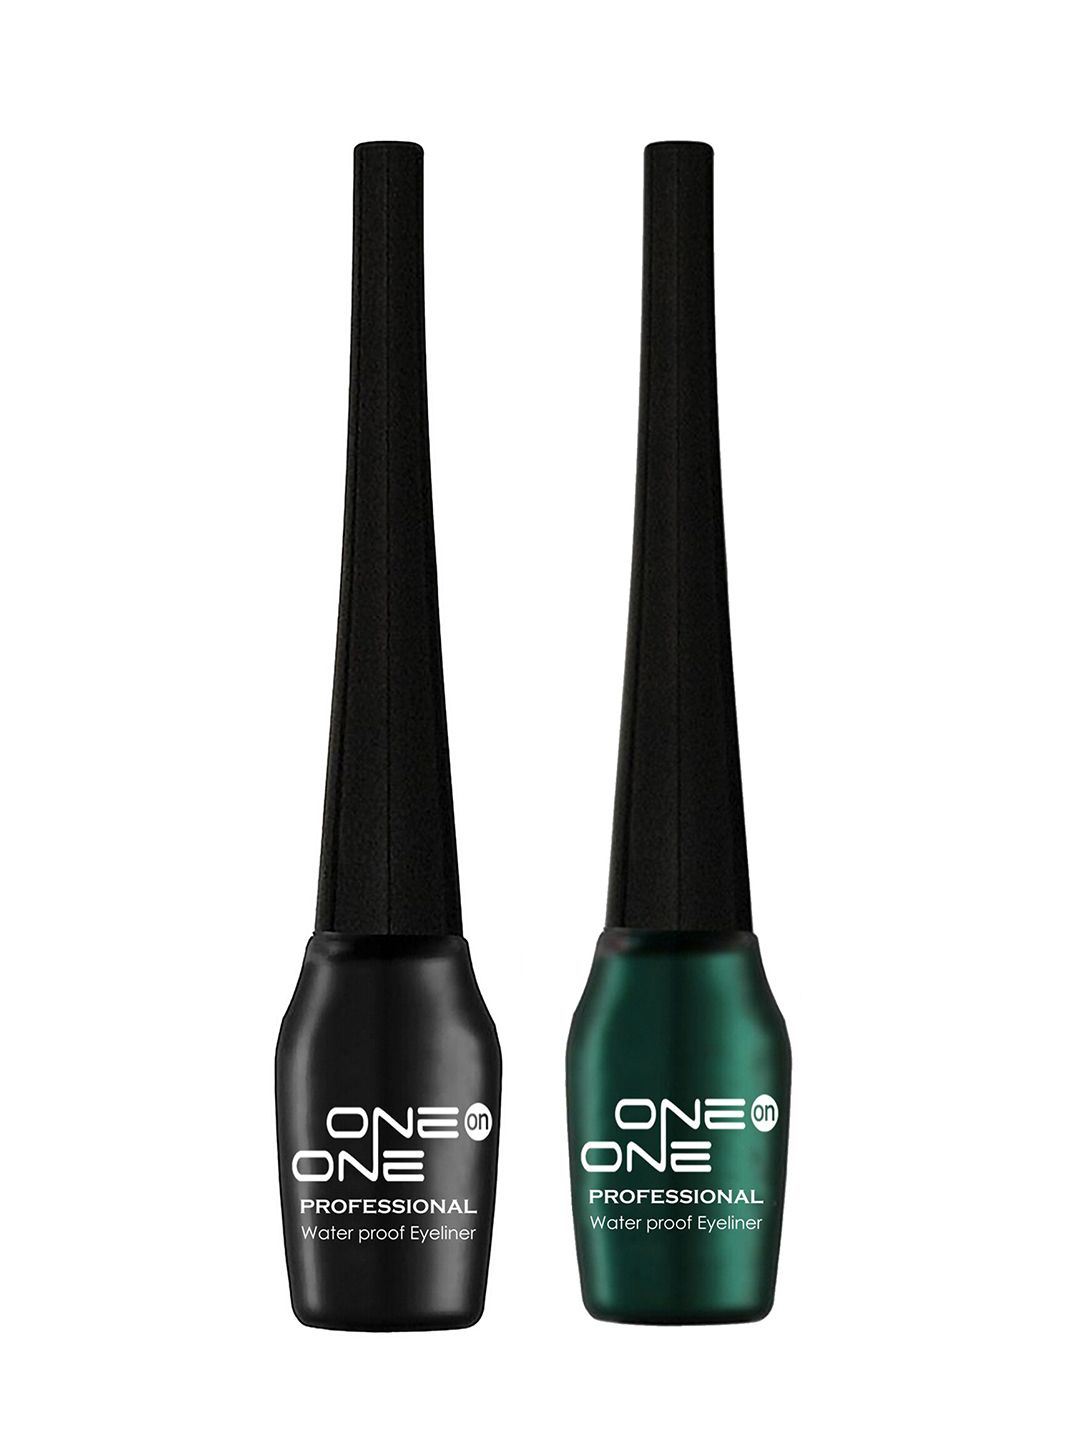 ONE on ONE Set of 2 Professional Waterproof Liquid Eyeliners Price in India